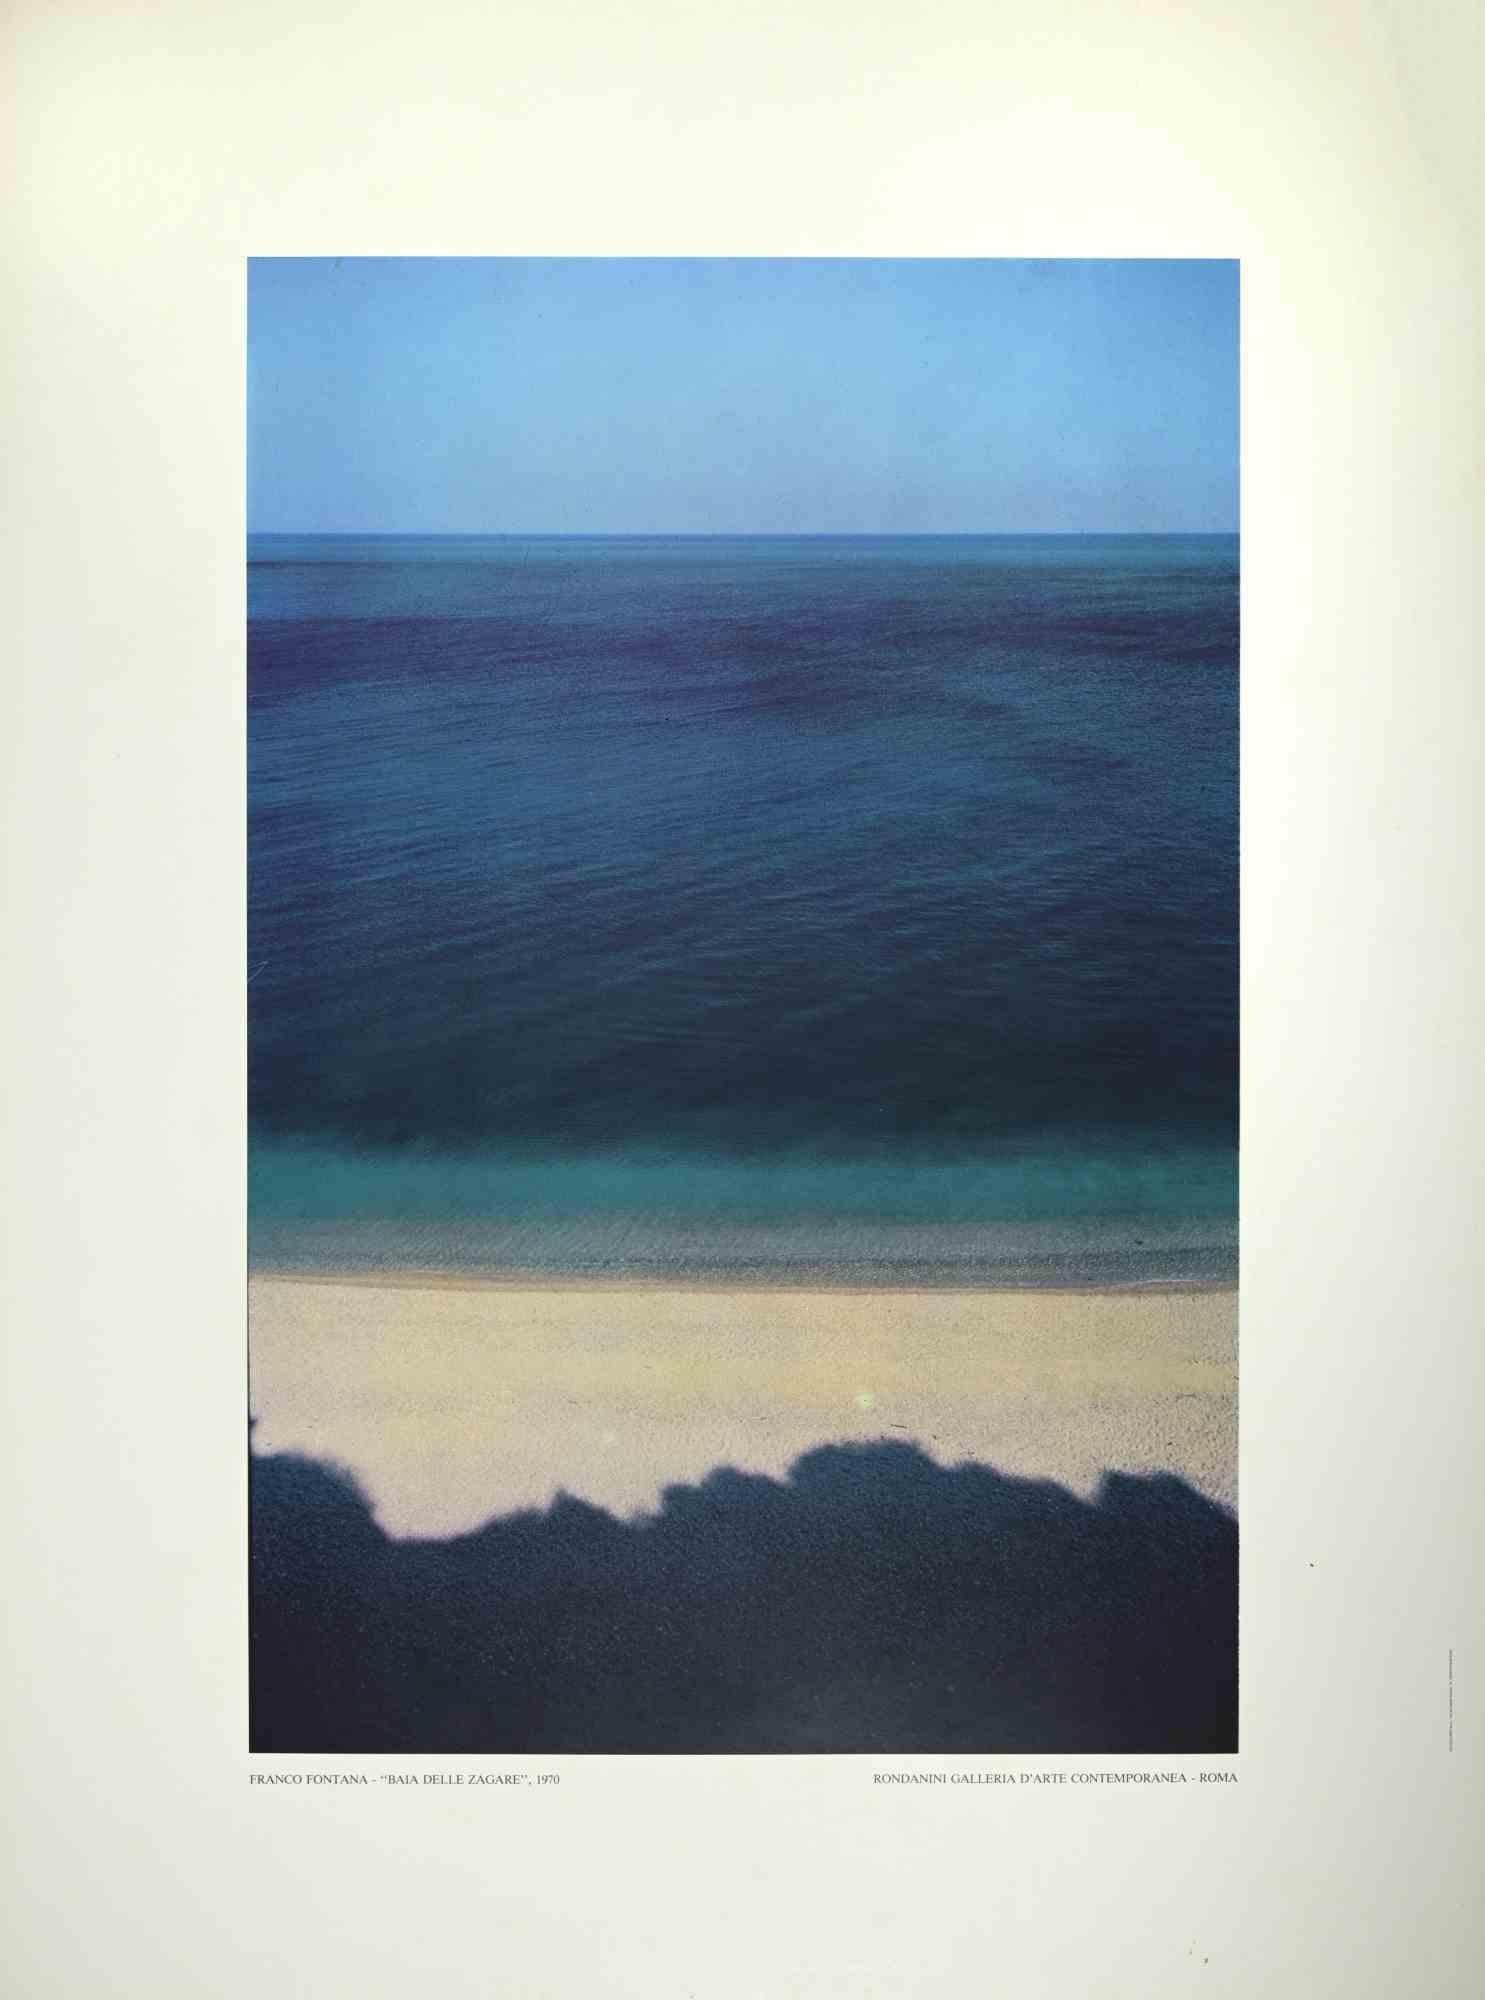 "Baia delle Zagare, 1970" is a beautiful offset realized by Franco Fontana.

Rondanini Galleria D'arte Contemporanea - Roma. Limited edition of 1.000

Coloured poster from a photograph by Franco Fontana (Modena, 1933), one of the italian most famous